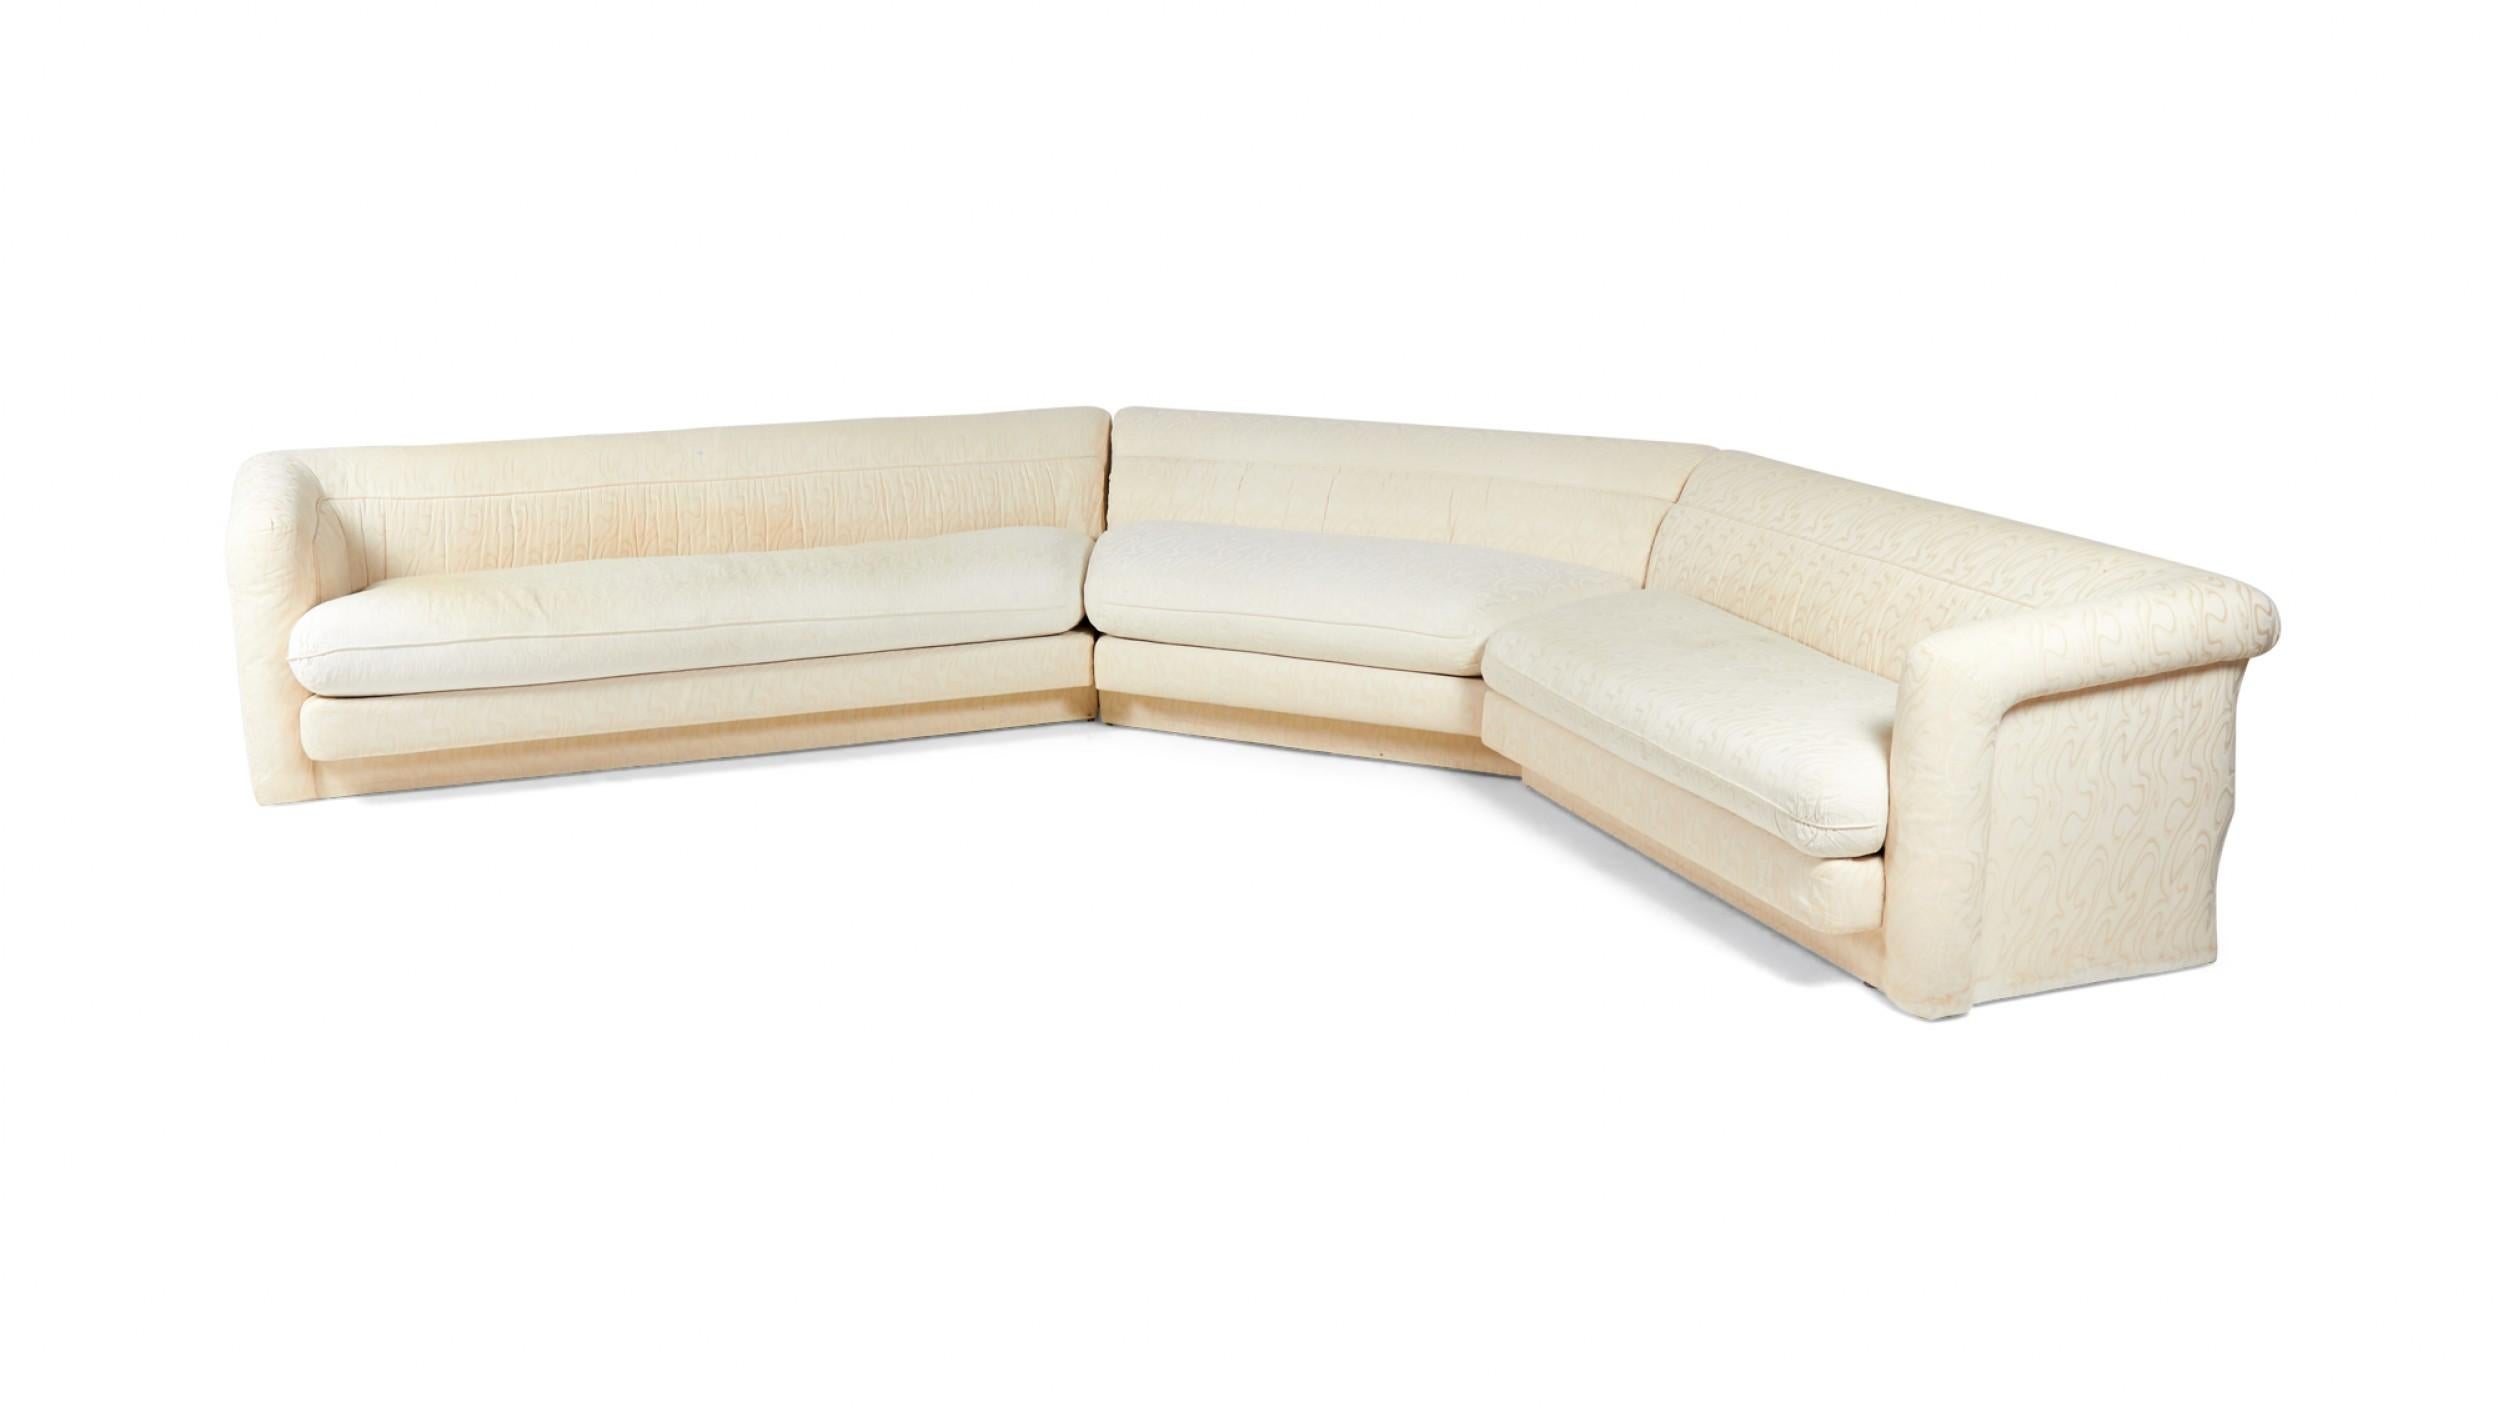 American Vintage (1980s) 3-piece sectional sofa with lightly swirl patterned white / cream upholstery, removable seat cushions, and arms on ends of two outer sections.